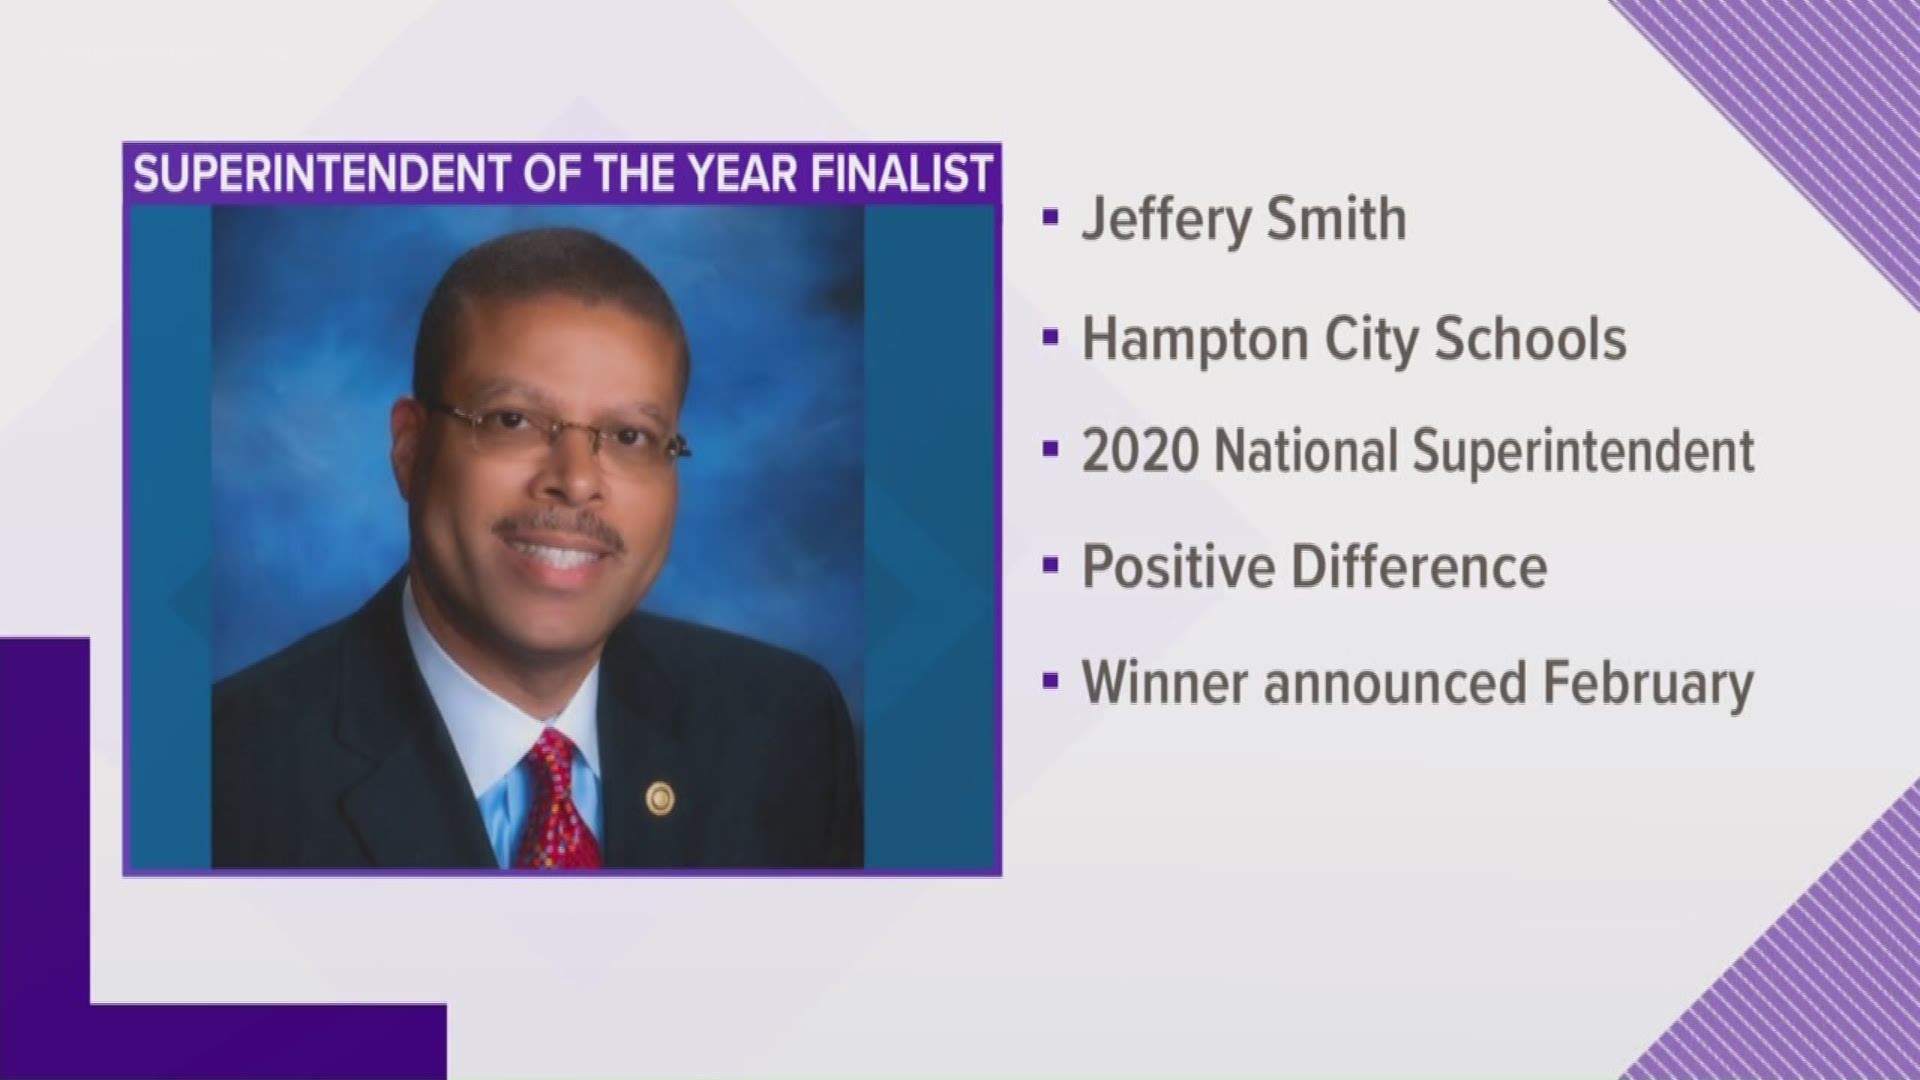 The superintendent of Hampton City Schools is a finalist for the 2020 Superintendent of the Year award. He has been with the school division since 2015.